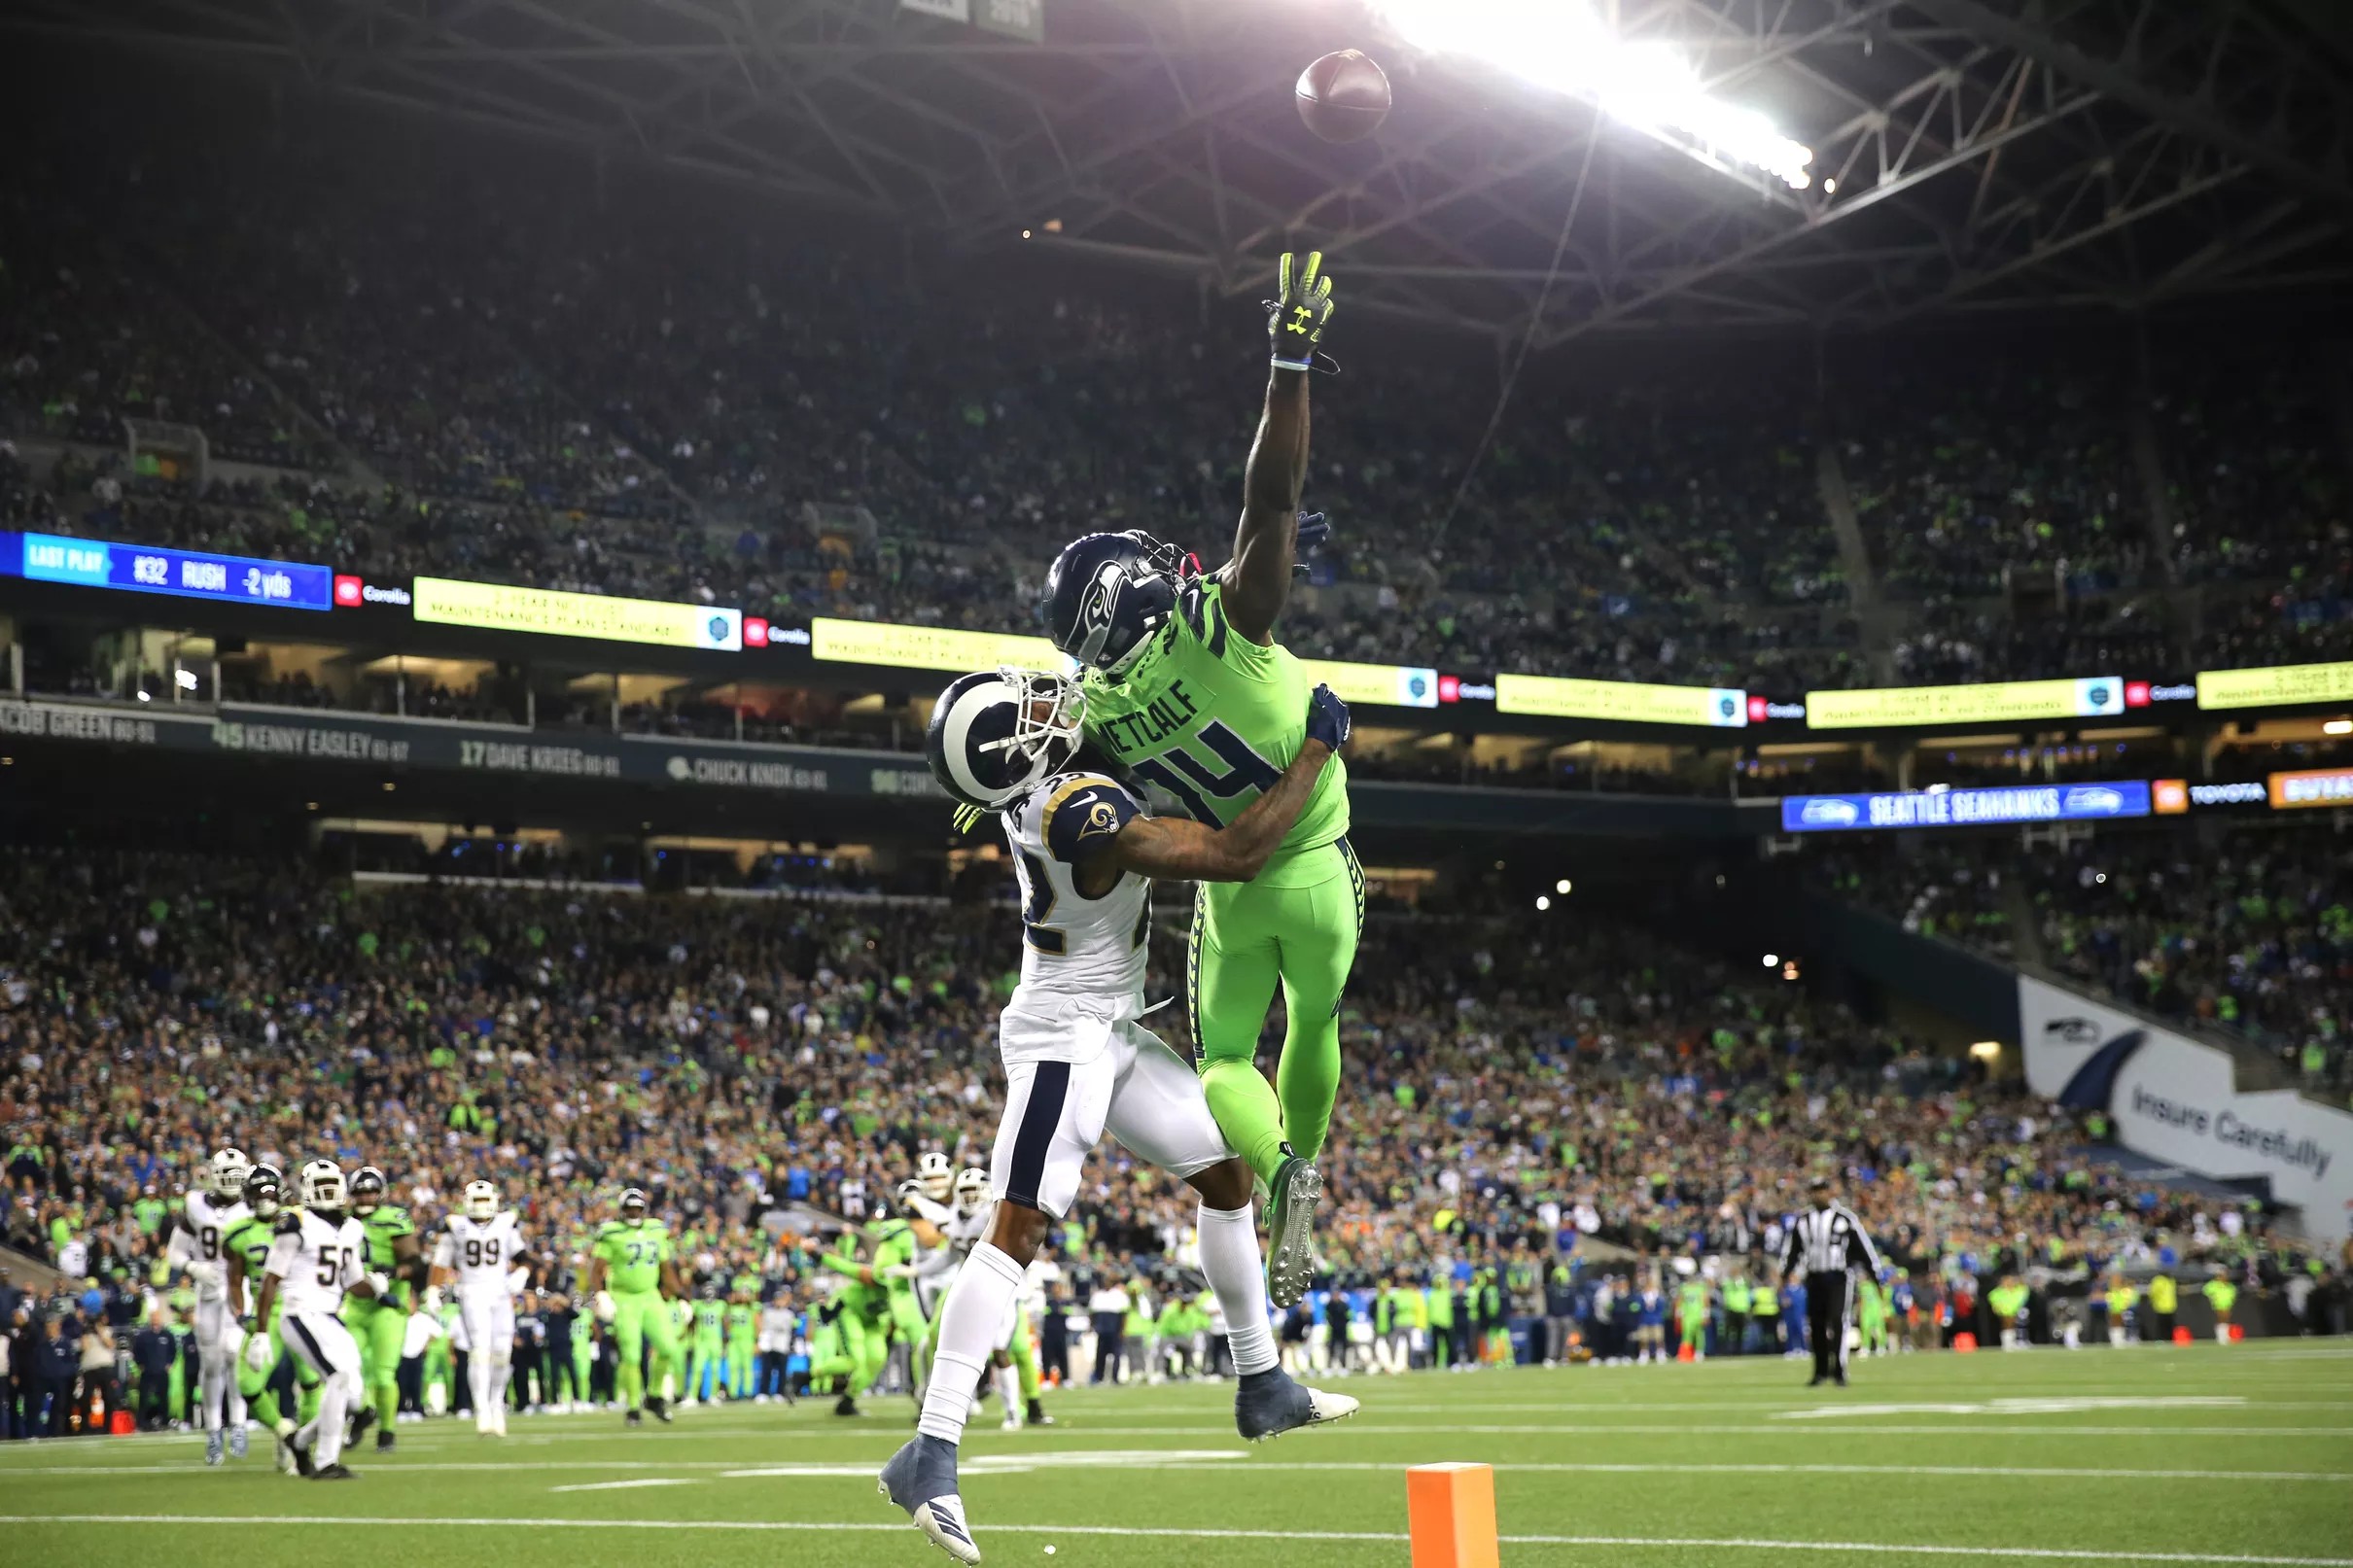 Seahawks winning despite almost no contribution from rookies